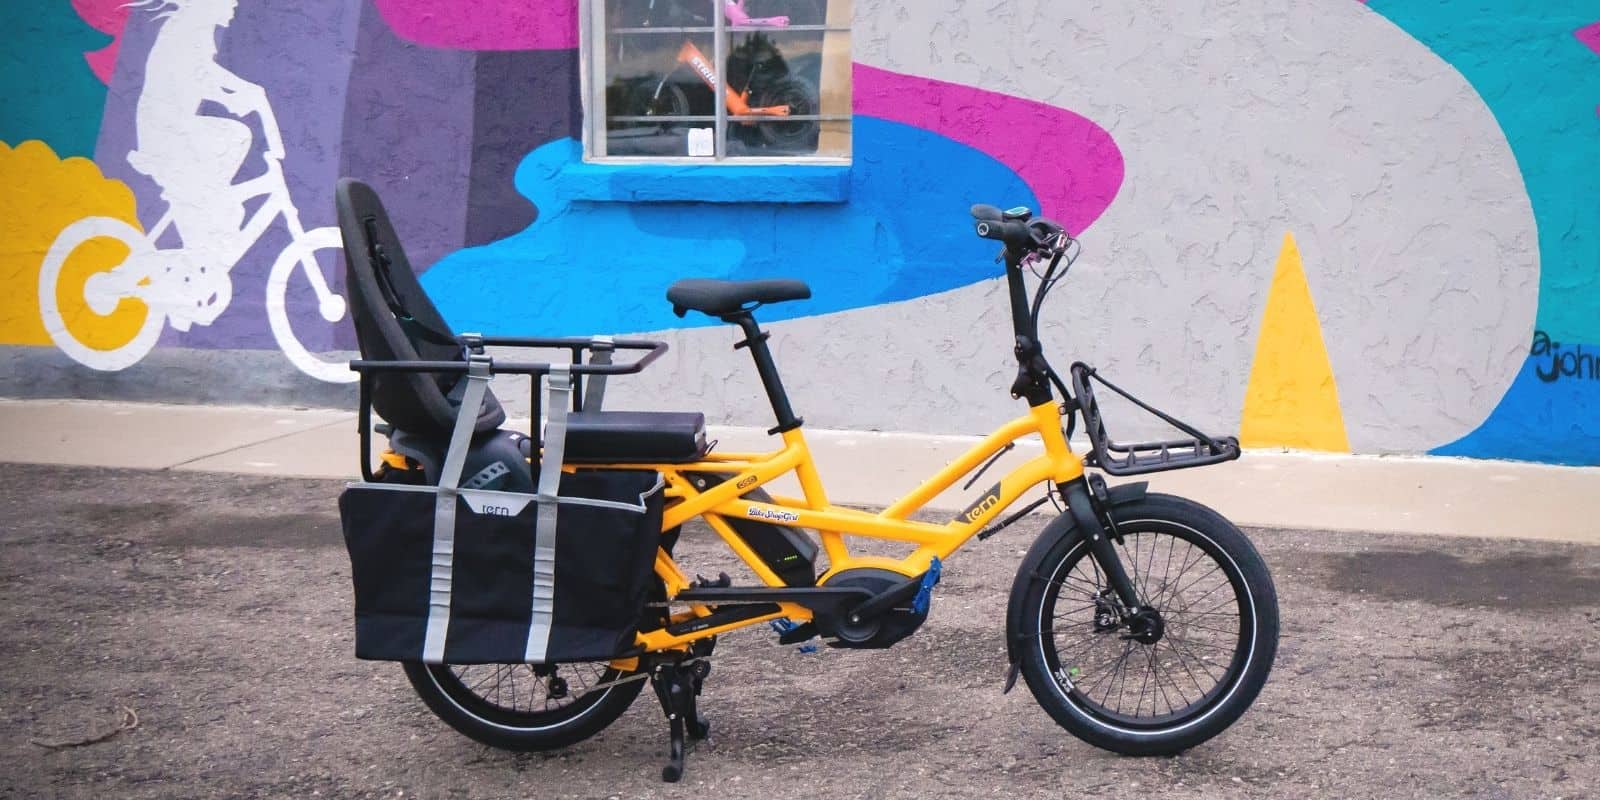 Tern GSD S00 Electric Cargo Bike Review